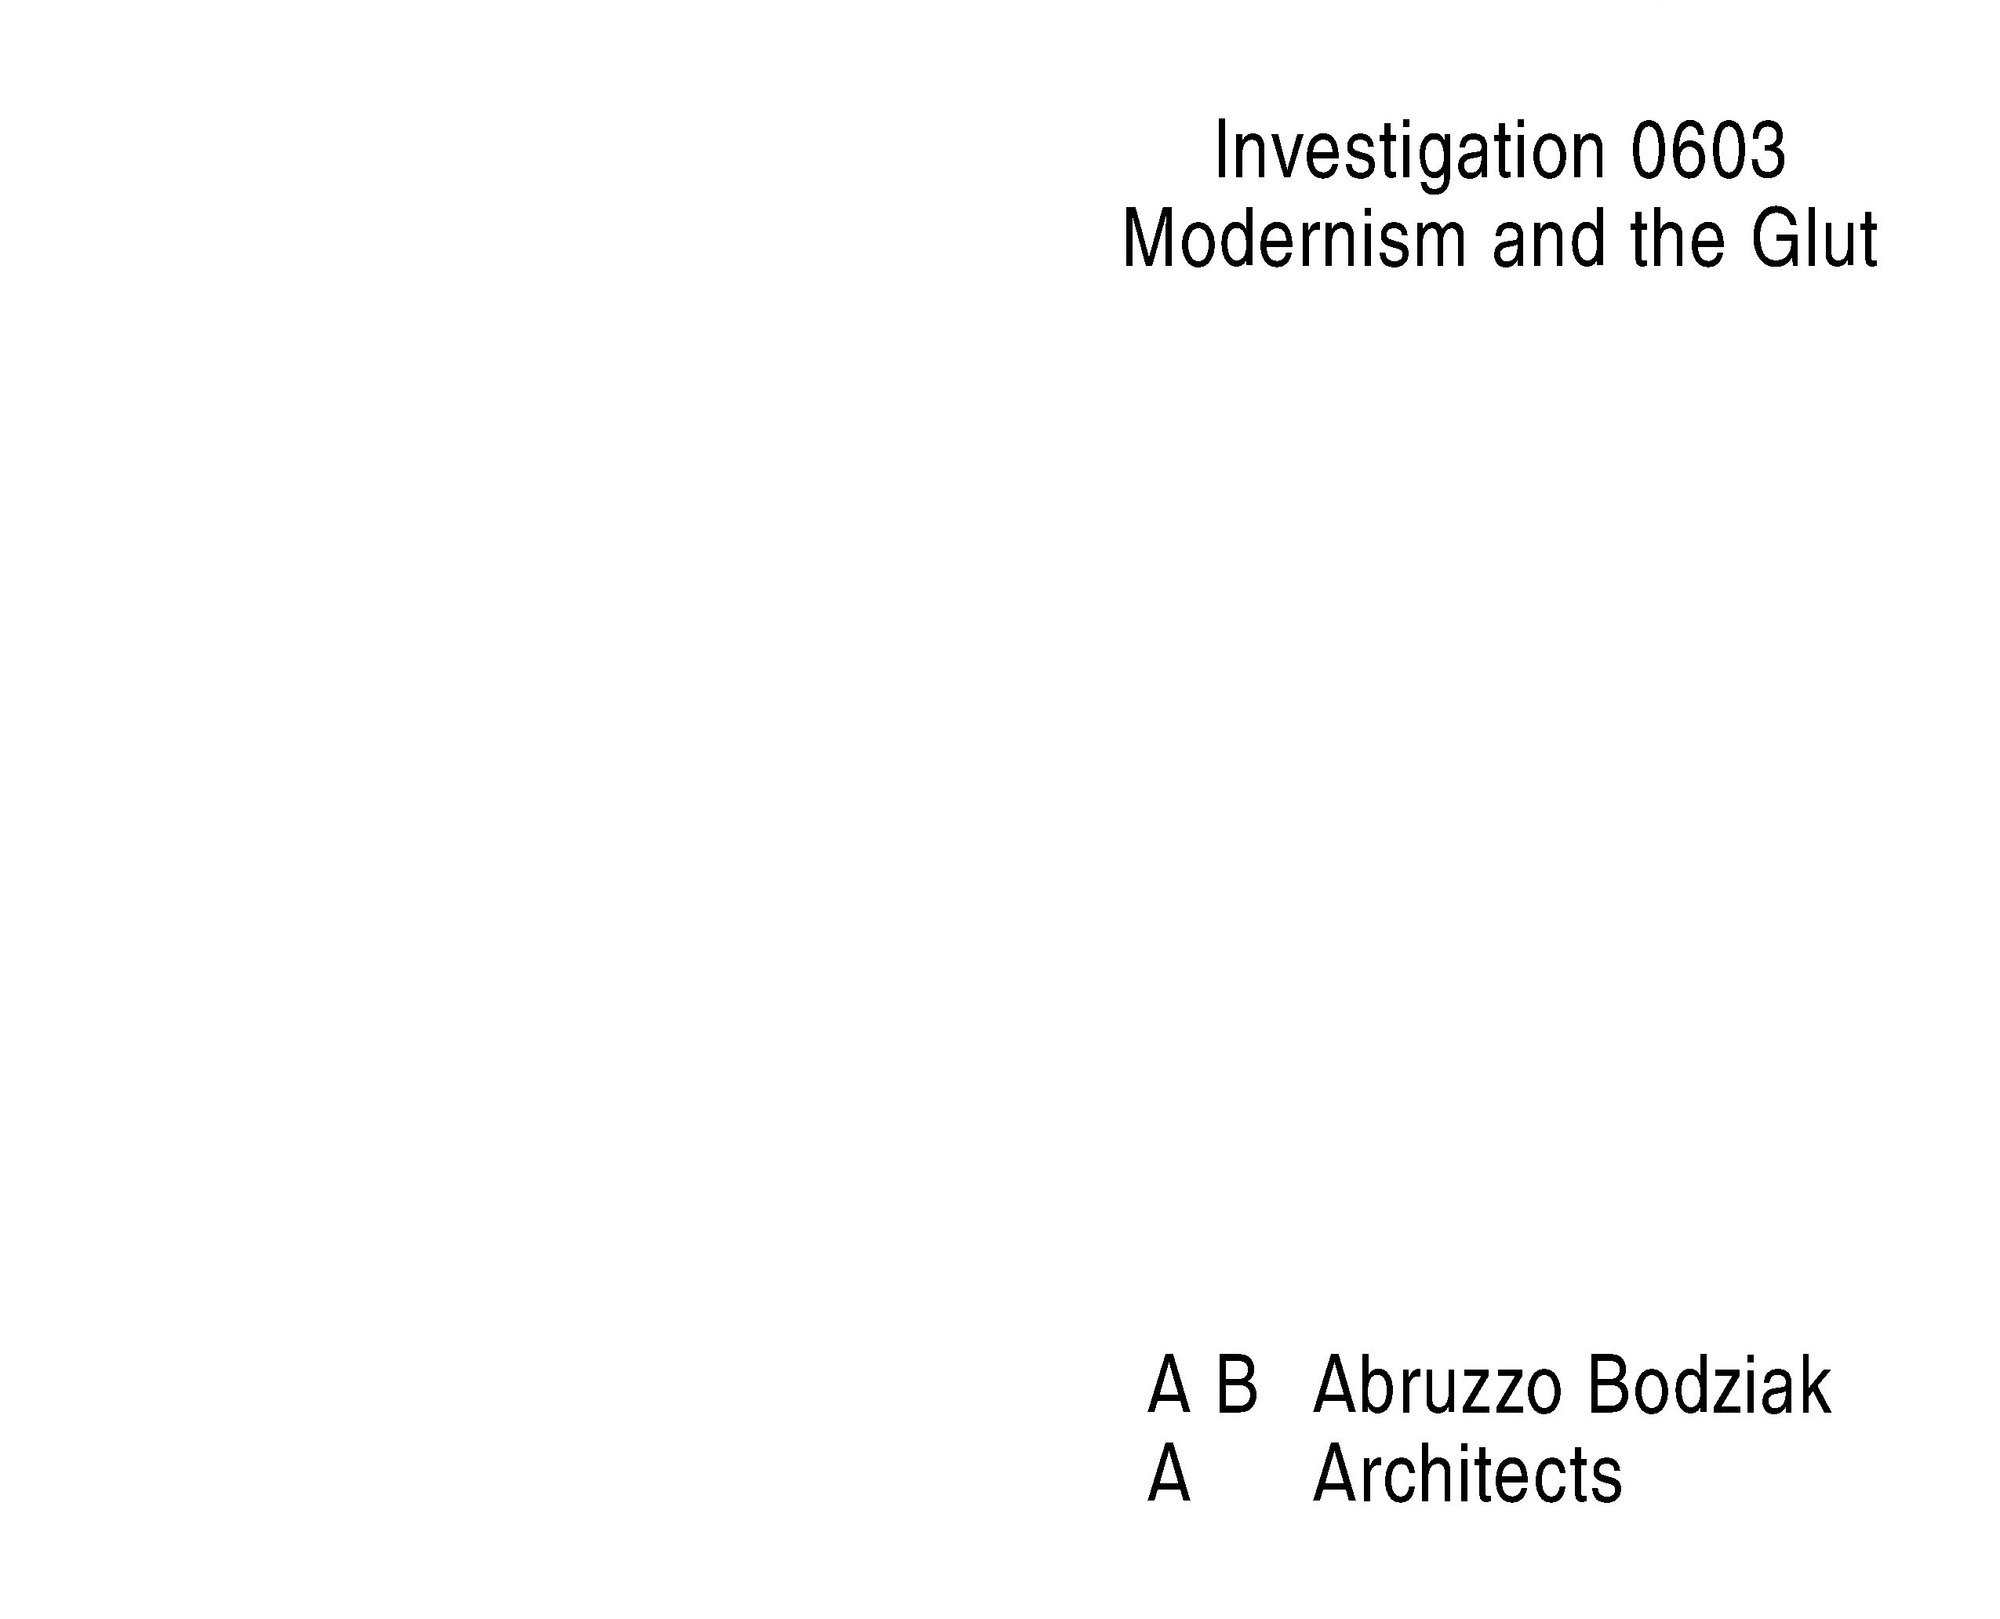 0603 modernism and the glut investigation page 02 2000 xxx q85